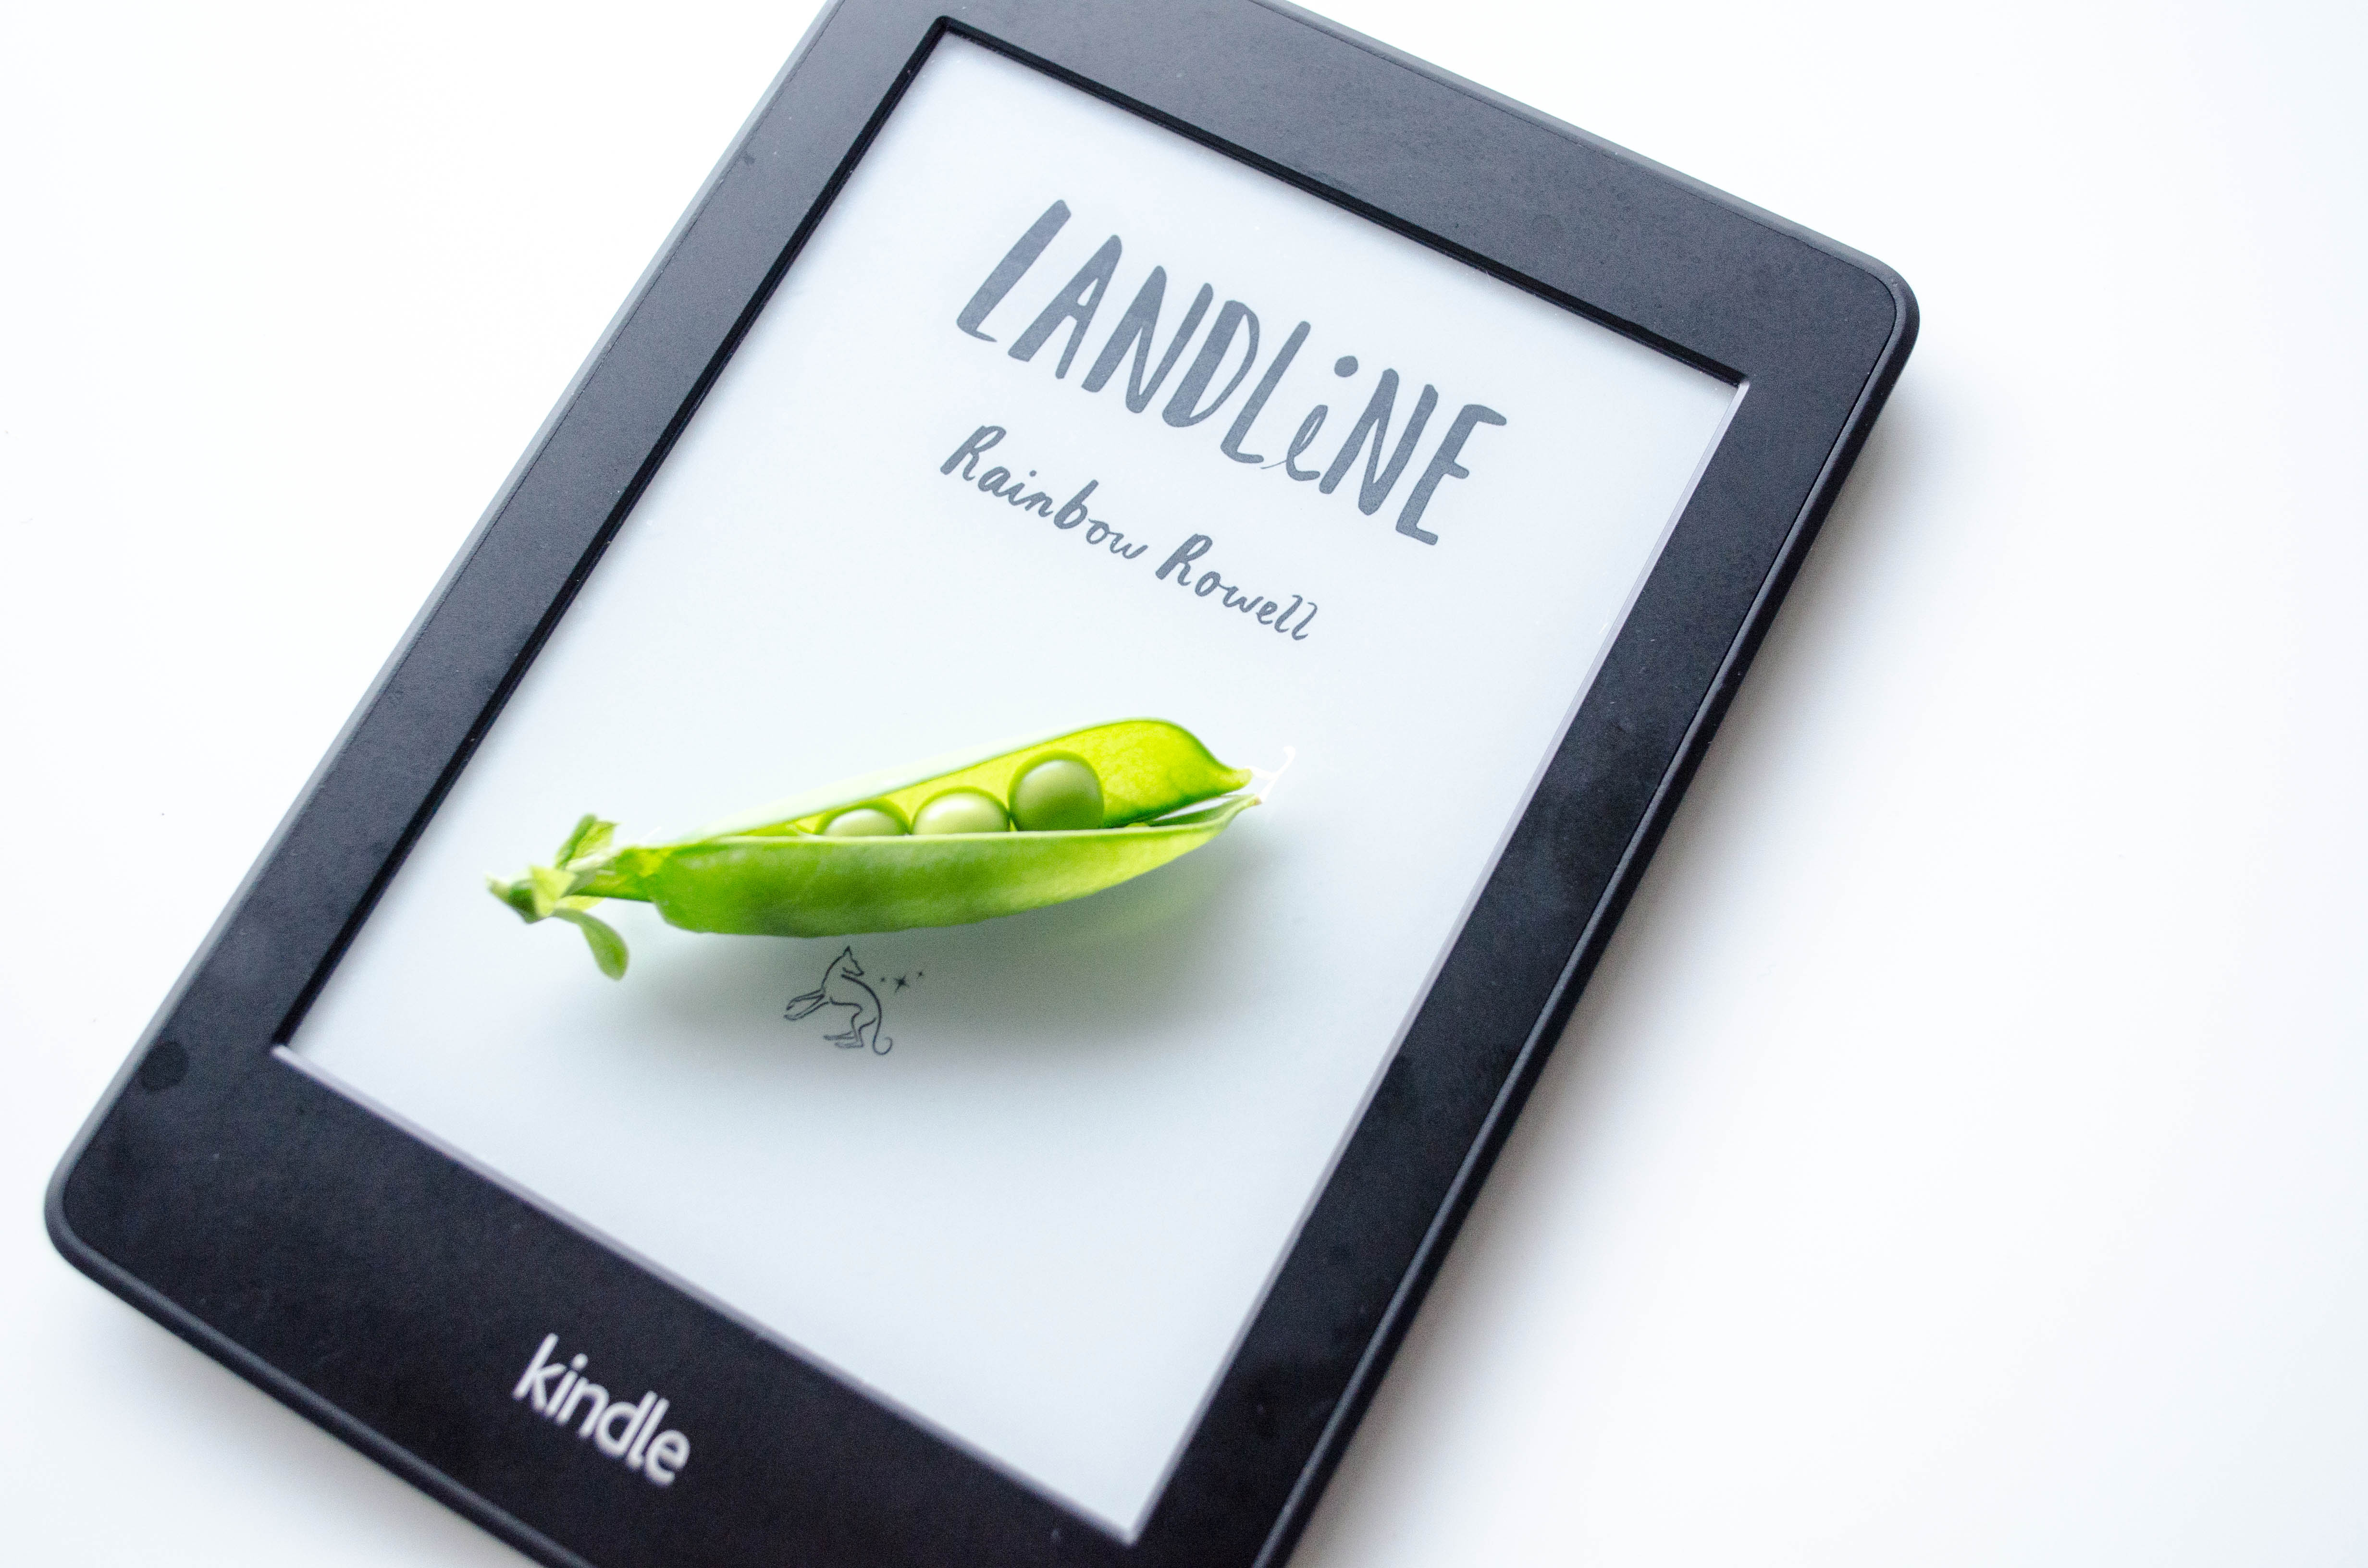 Rainbow Rowell's books for adults are just as good as the YA stuff. I read and loved the Kindle version of her book, Landline.